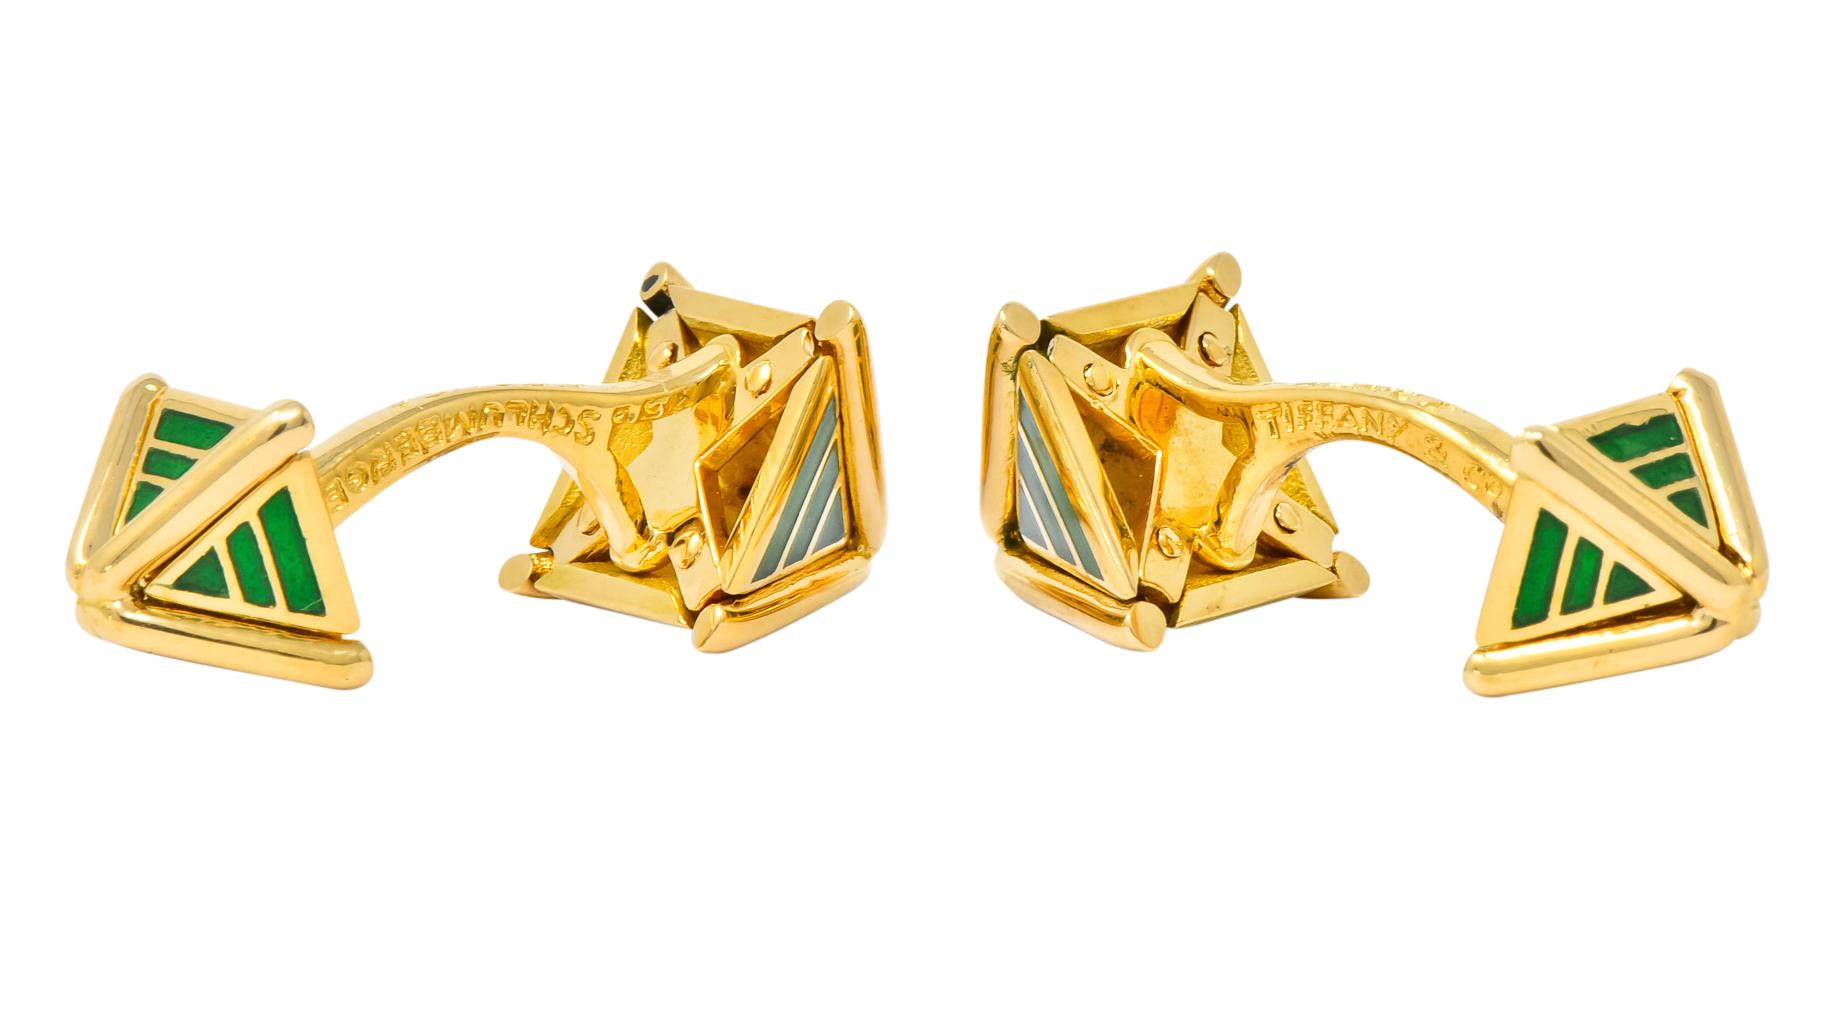 Fixed back style cufflinks with each end as a hollow pyramid, one side larger than the other

Featuring green enamel stripes 

Fully signed Schlumberger, Tiffany & Co. France

Stamped 750 with French assay marks for 18 karat gold

Length: approx. 1